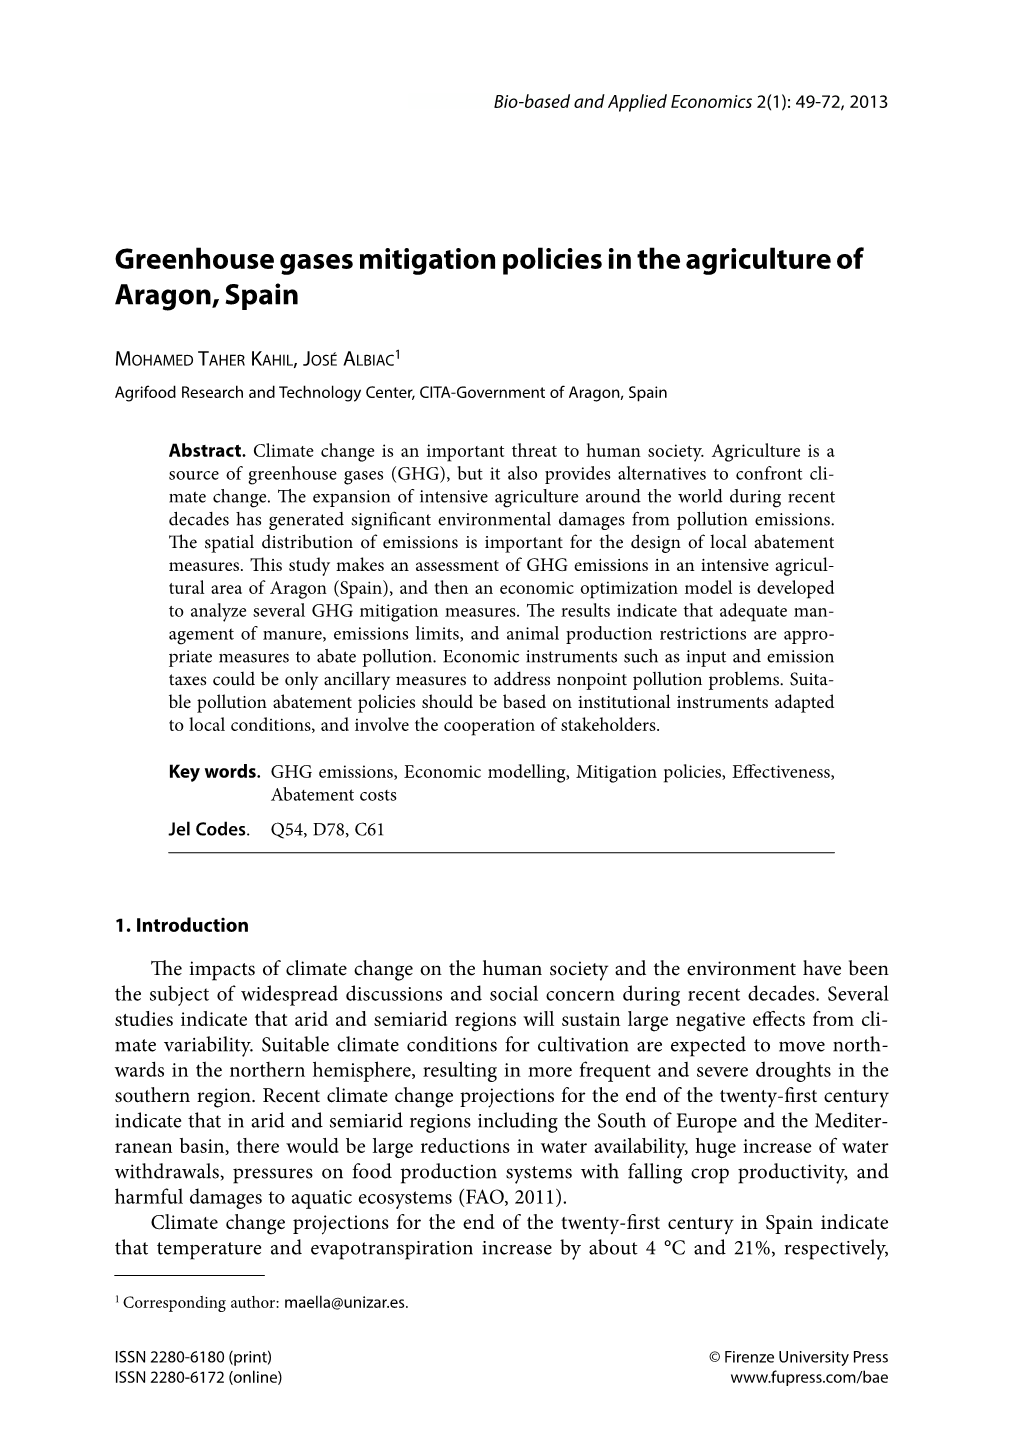 Greenhouse Gases Mitigation Policies in the Agriculture of Aragon, Spain